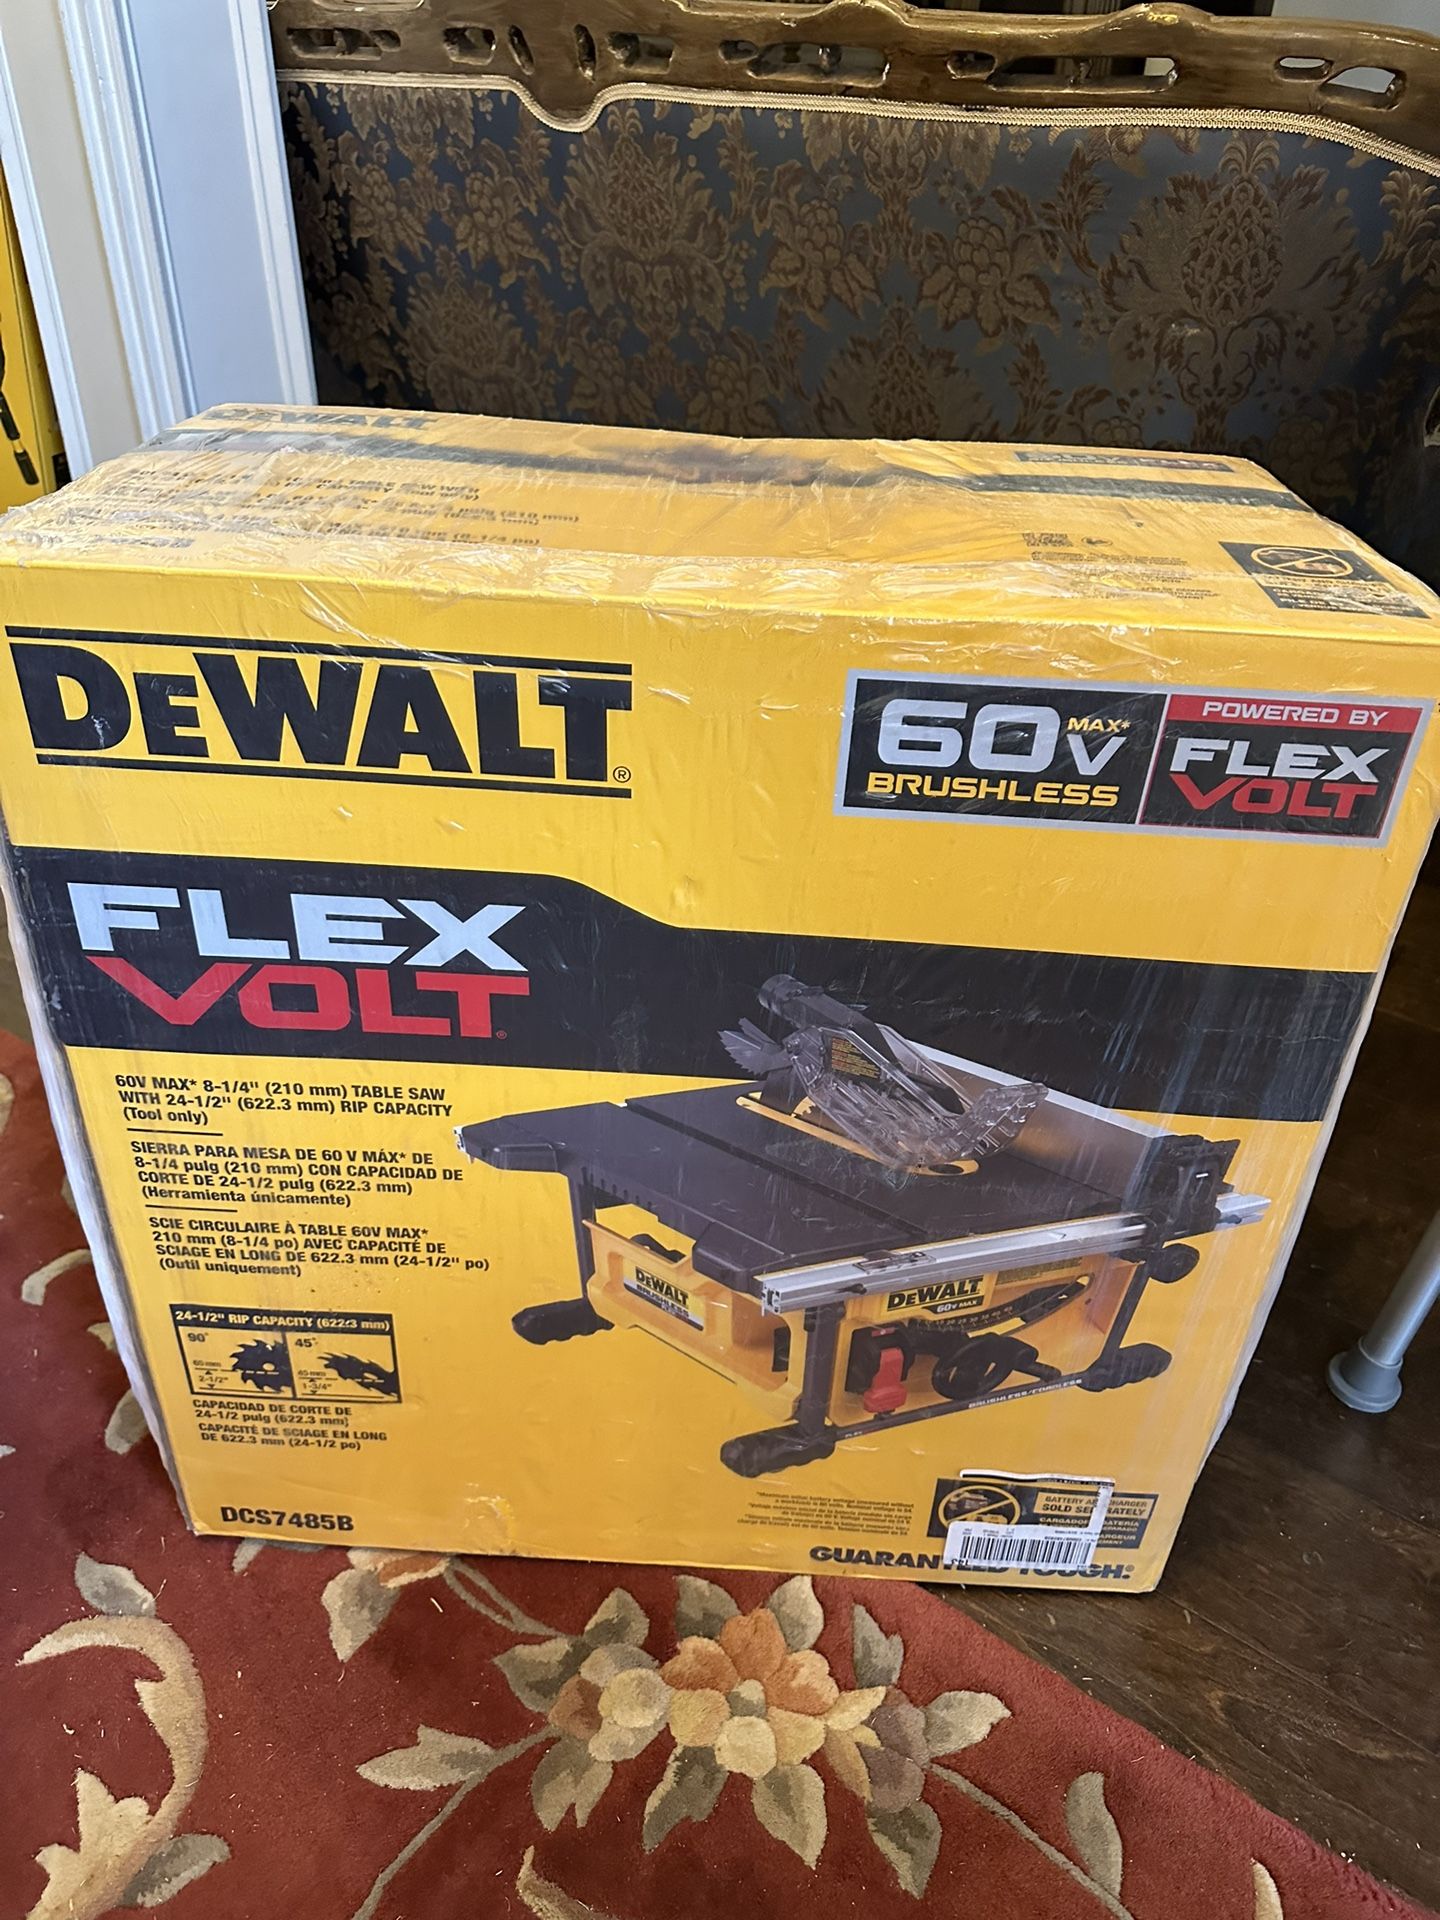 Brand New in Box Dewalt FLEXVOLT 60V MAX Cordless Brushless 8-1/4 in. Table Saw Kit (Tool Only). Retail around $500 including tax 